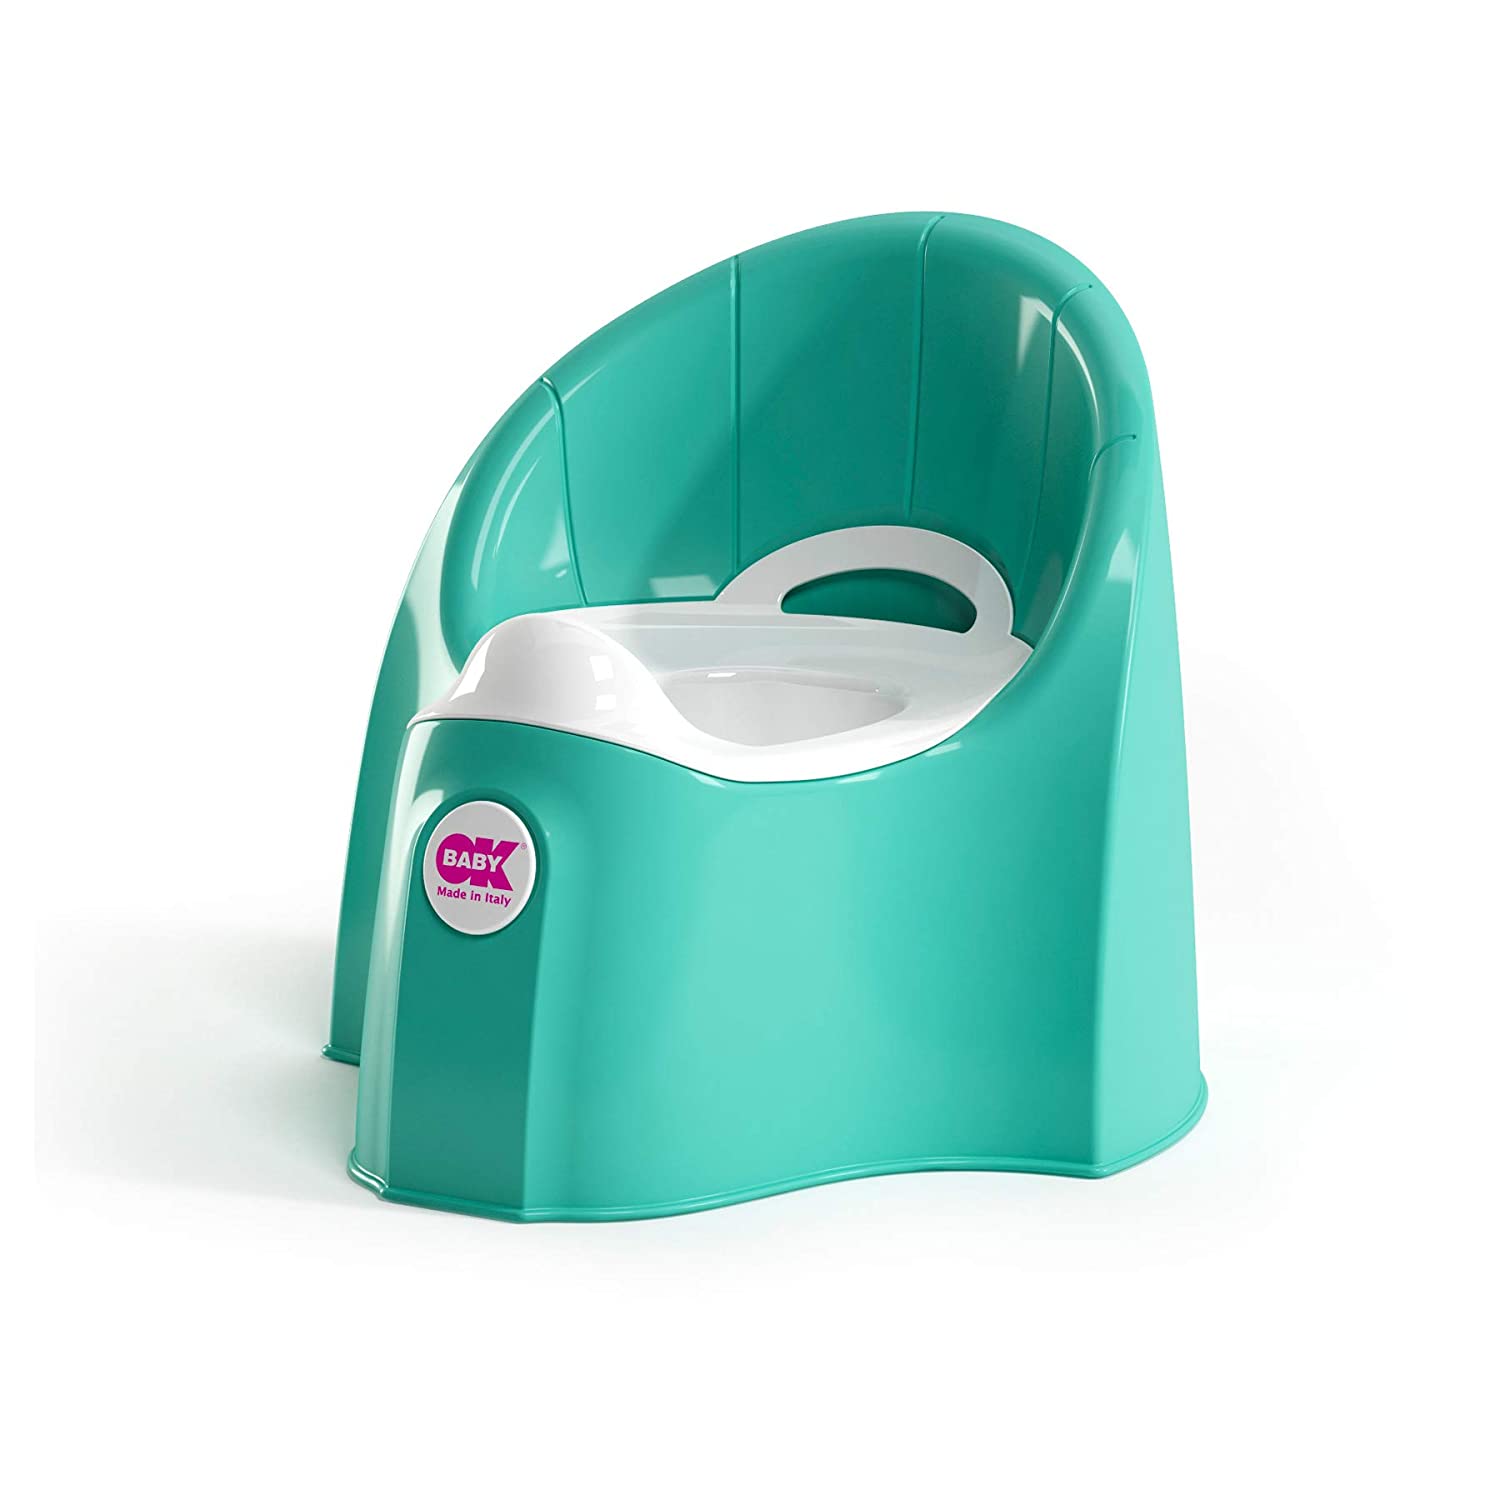 OK Baby Pasha N38917240X Futuristic Potty for Relaxed Shops, Turquoise